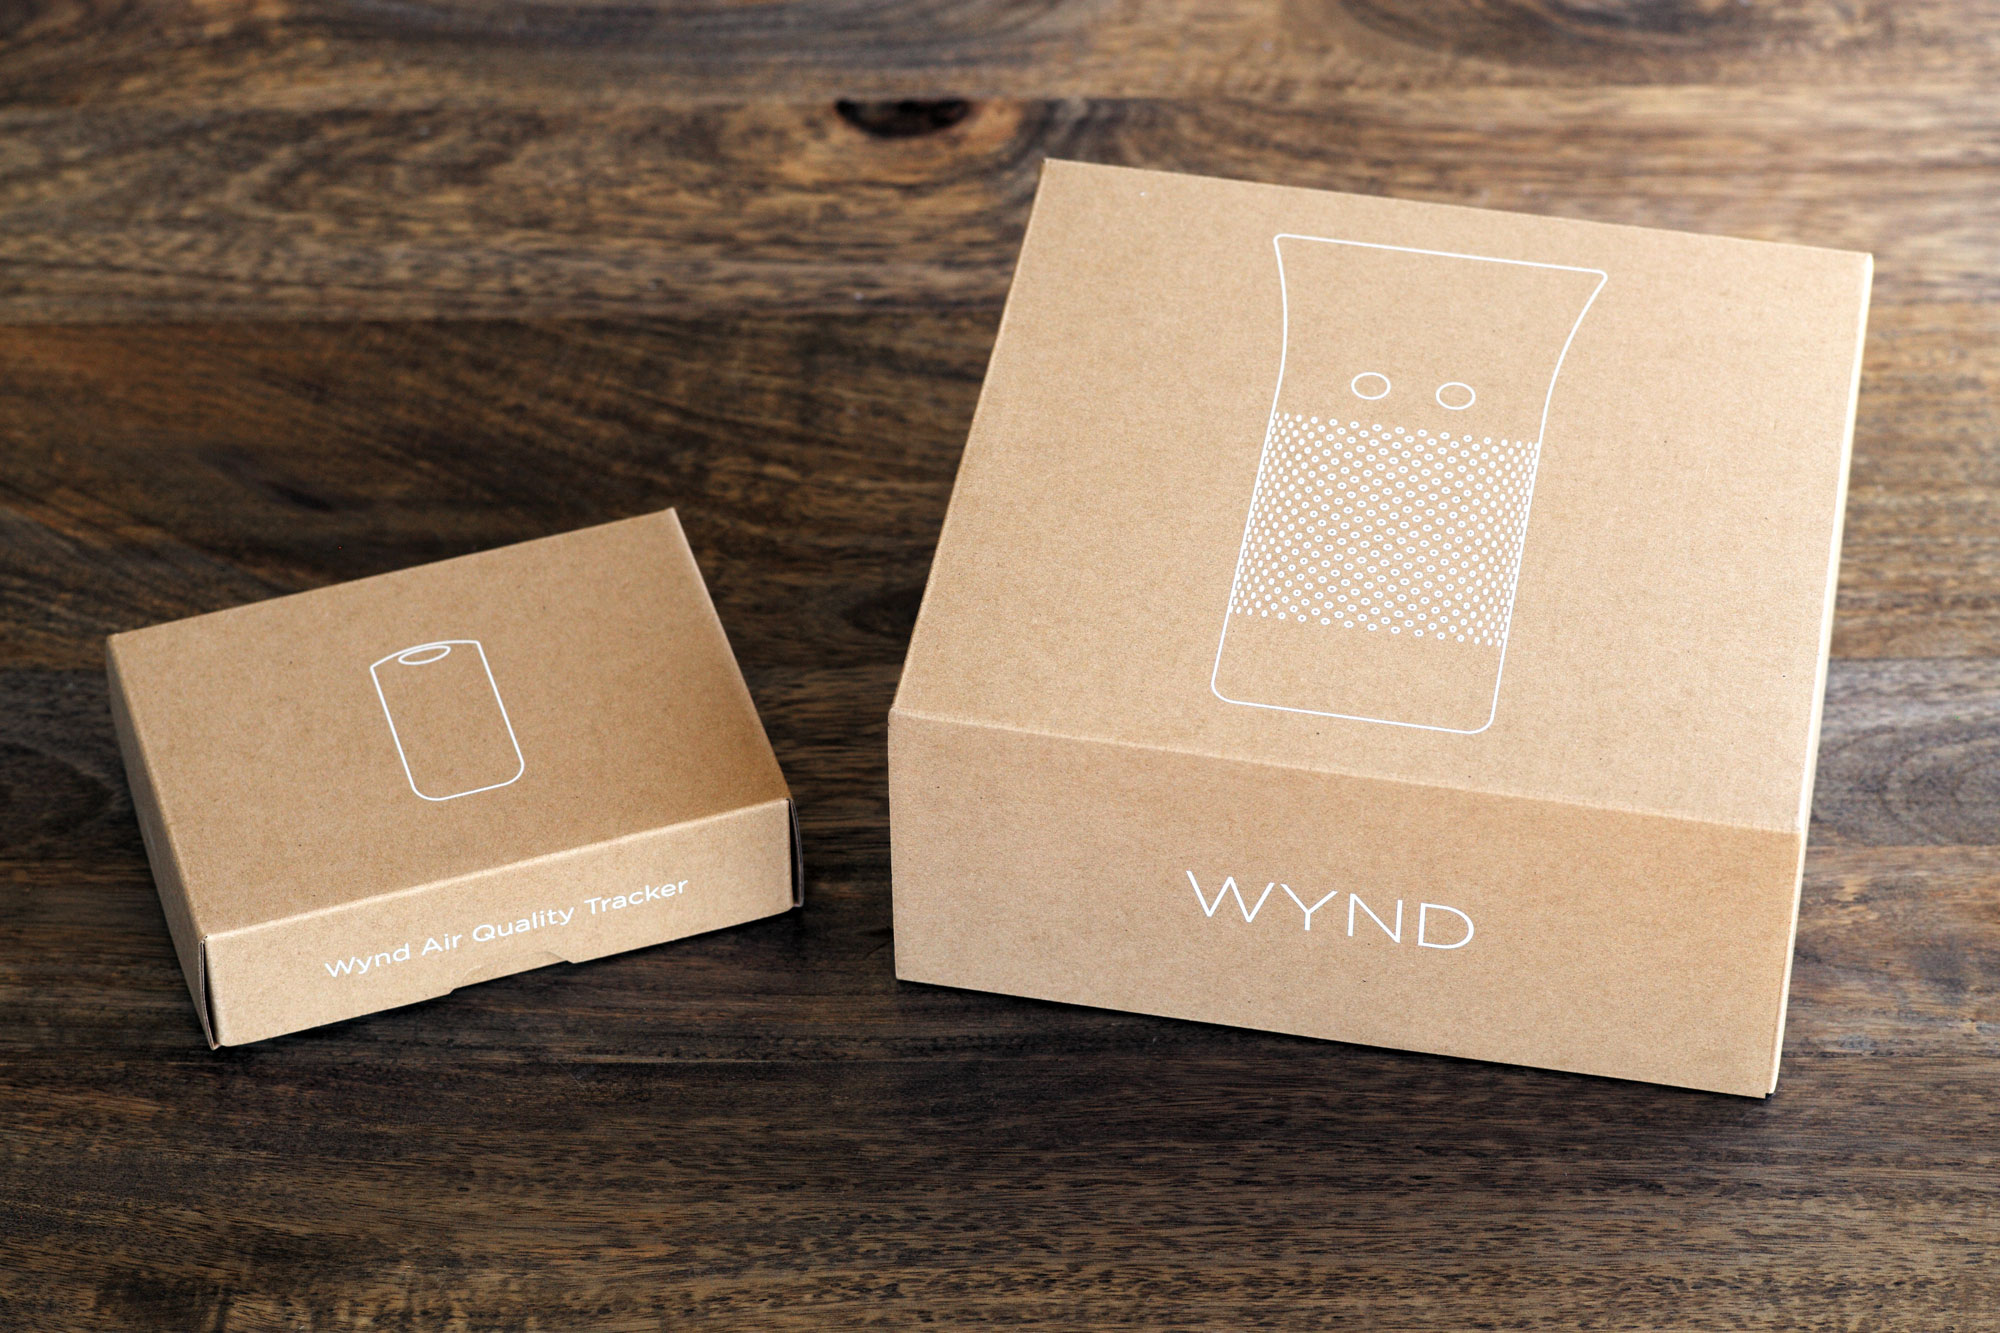 Wynd packaging - the purifier and tracker box